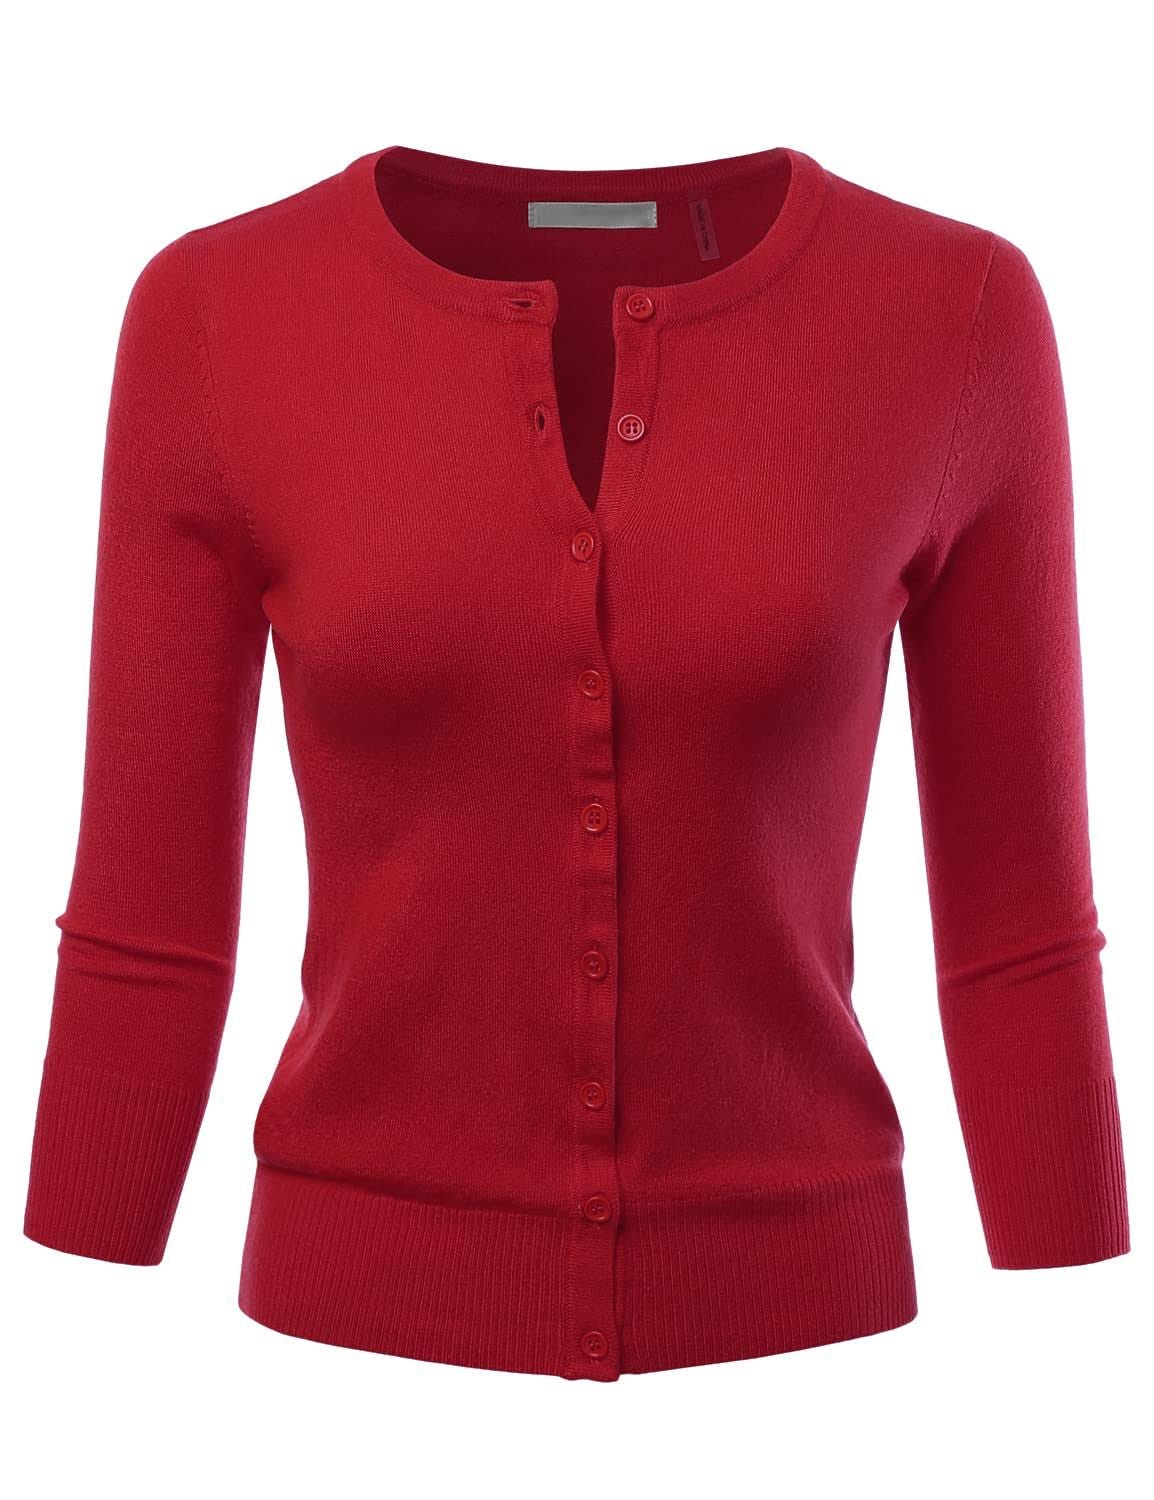 Red Knit Cardigan for Women - Cozy and Stylish Option | Image